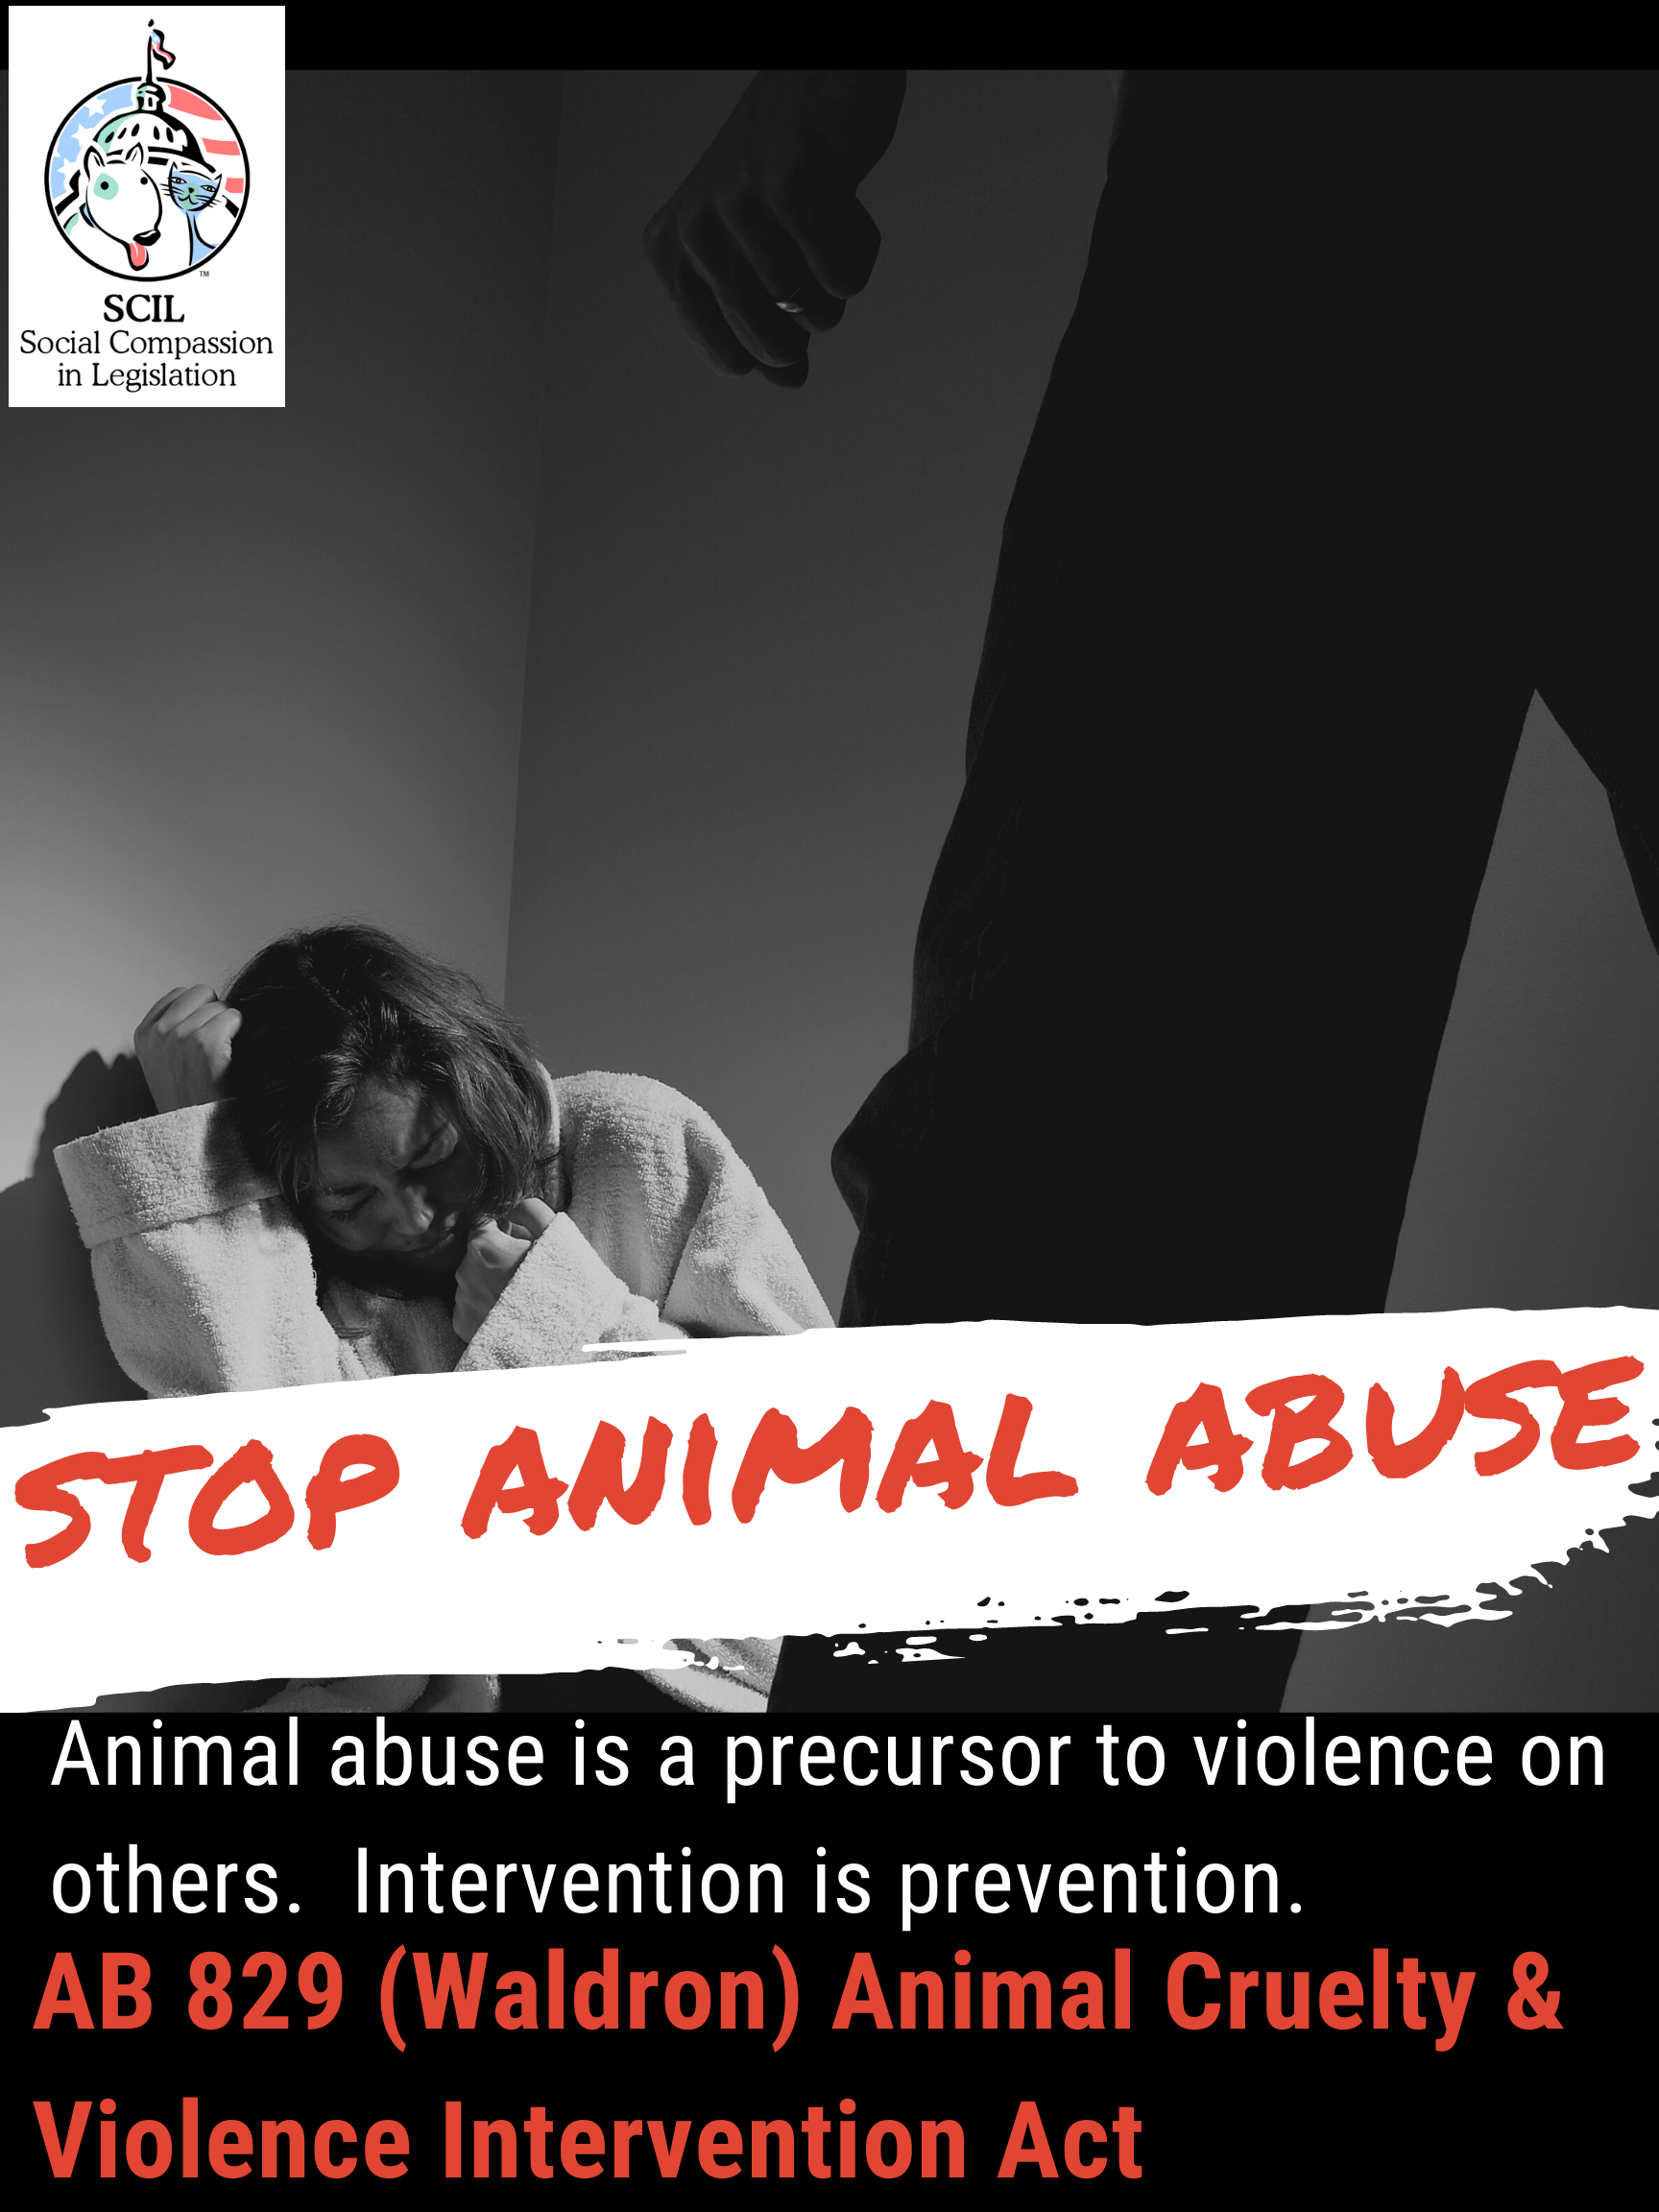 AB 829 (Waldron) The Animal Cruelty & Violence Intervention Act